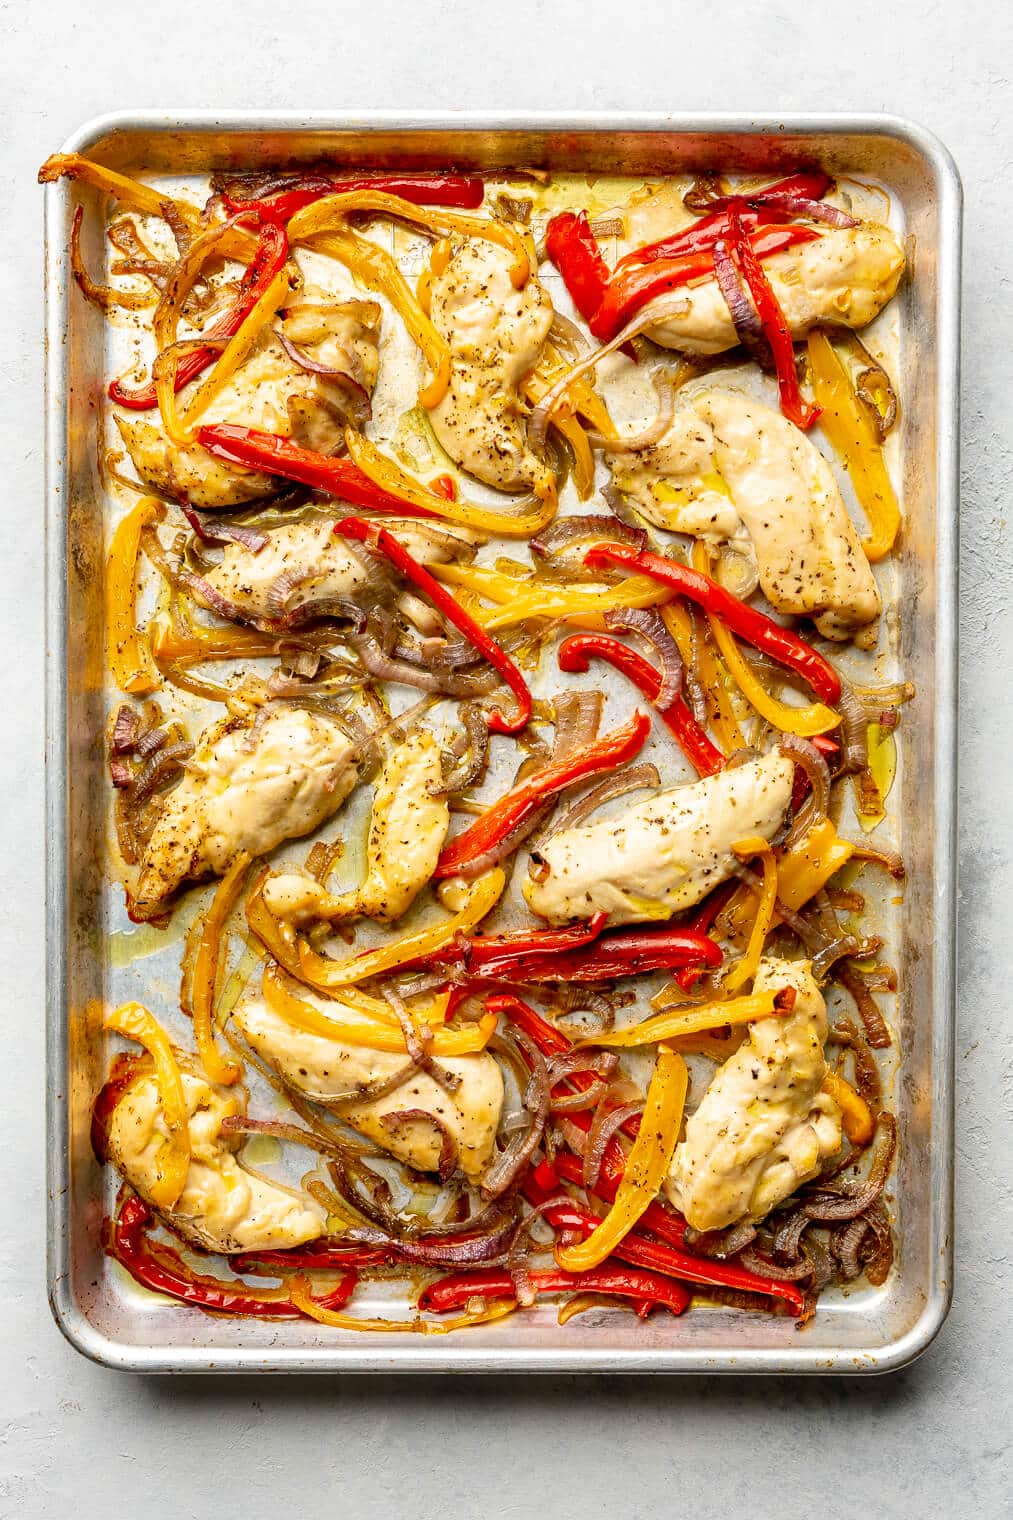 A sheet pan of cooked chicken fajitas, complete with chicken, red bell peppers, yellow bell peppers, and onions.